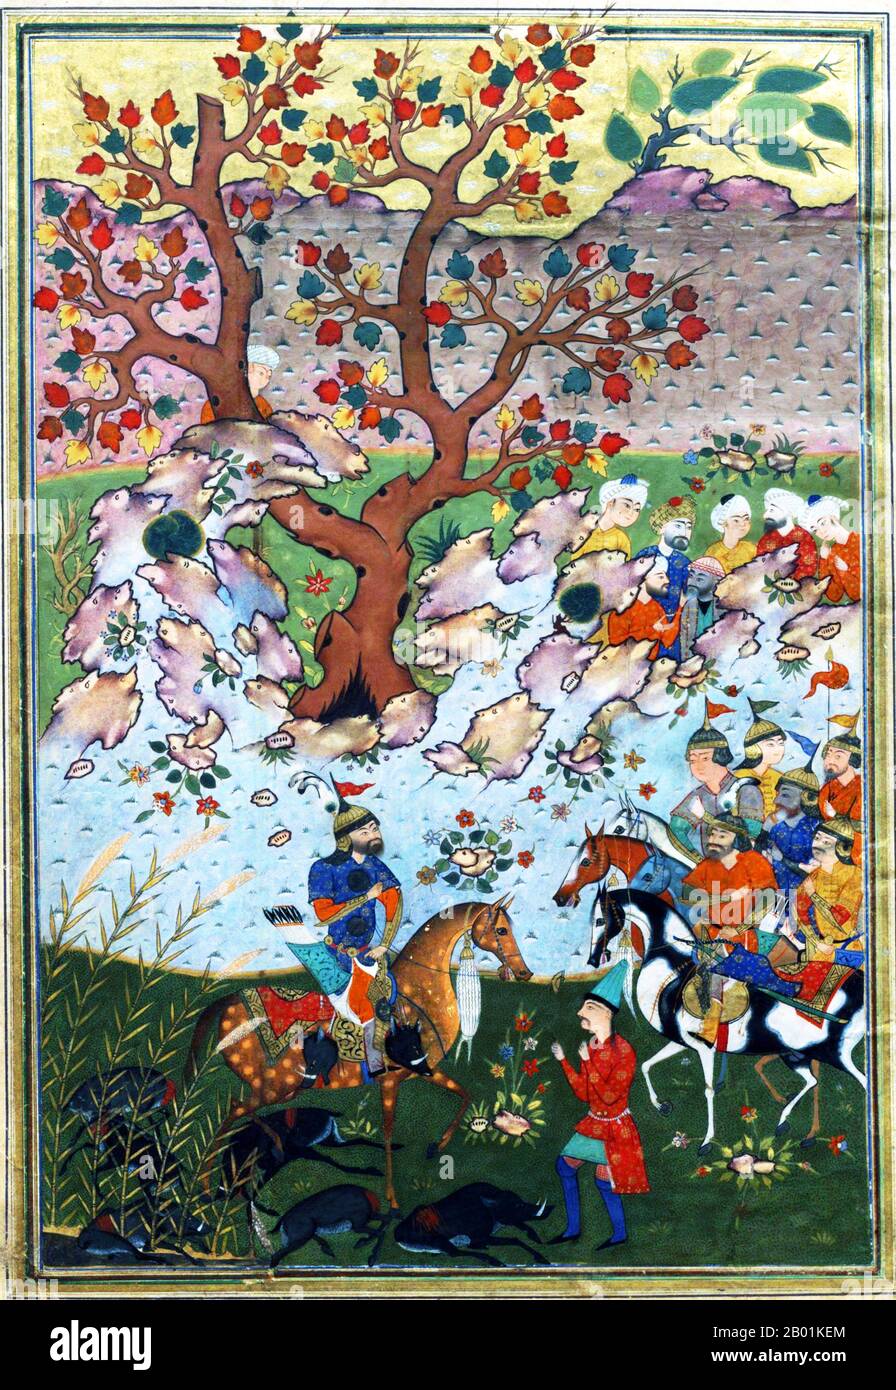 Iran/Persia: 'Never hence would I die for I am alive, having sown the seeds of poetry'. Gurgin betrays Bizhan. Miniature painting from the Shahnameh, c. 16th century.  The Shahnameh or Shah-nama (Šāhnāmeh, 'The Book of Kings') is a long epic poem written by the Persian poet Ferdowsi between c. 977 and 1010 CE and is the national epic of Iran and related Perso-Iranian cultures. Consisting of some 60,000 verses, the Shahnameh tells the mythical and to some extent the historical past of Greater Iran from the creation of the world until the Islamic conquest of Persia in the 7th century. Stock Photo